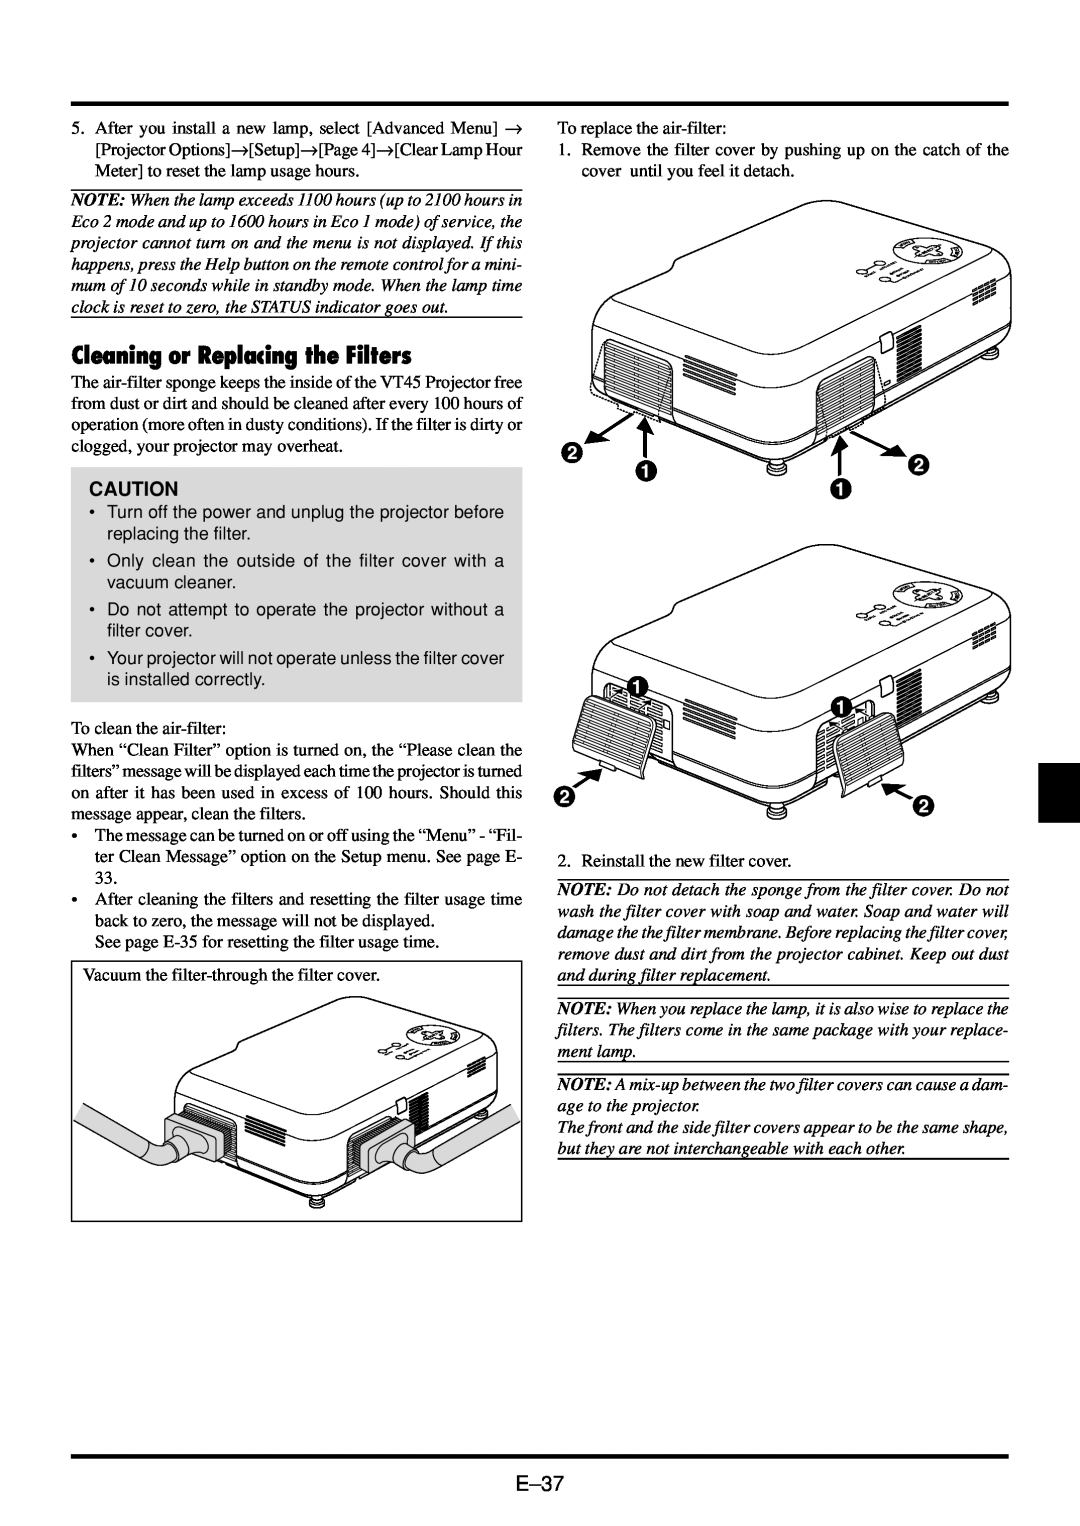 NEC VT45 user manual Cleaning or Replacing the Filters, E-37 